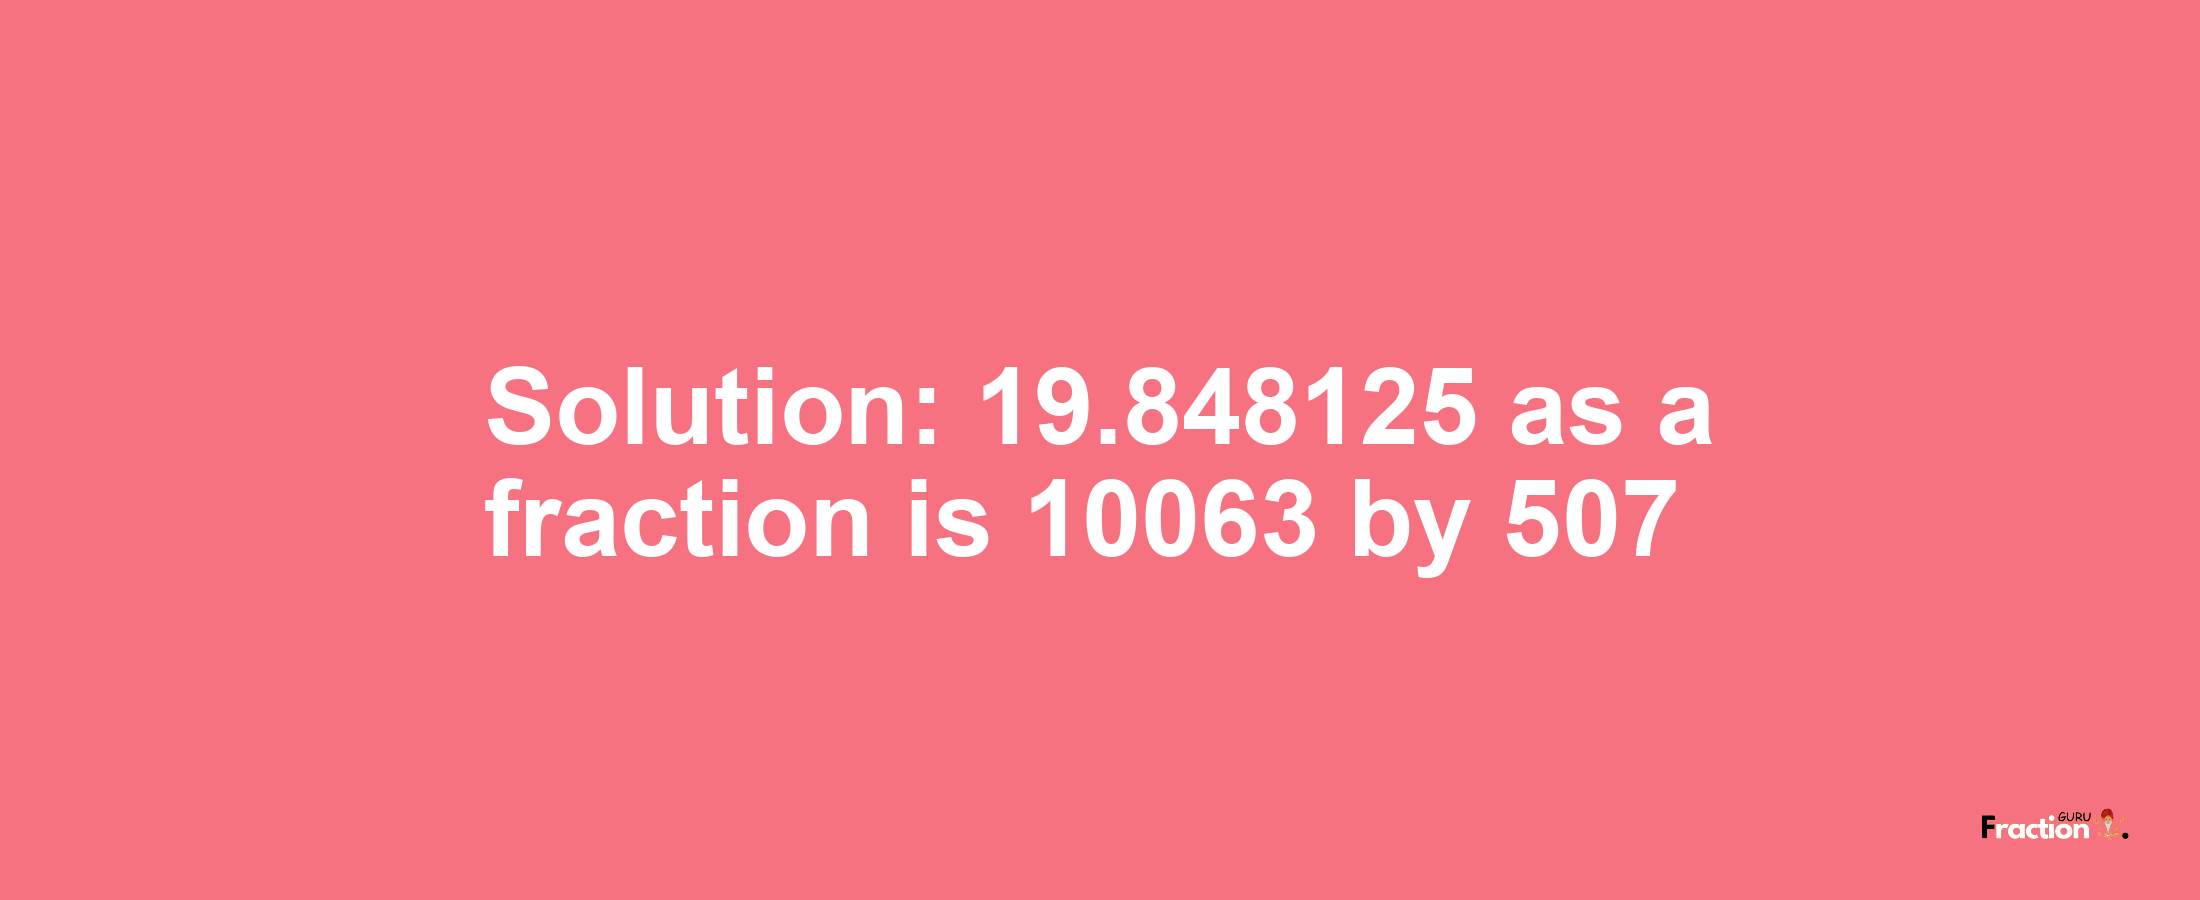 Solution:19.848125 as a fraction is 10063/507